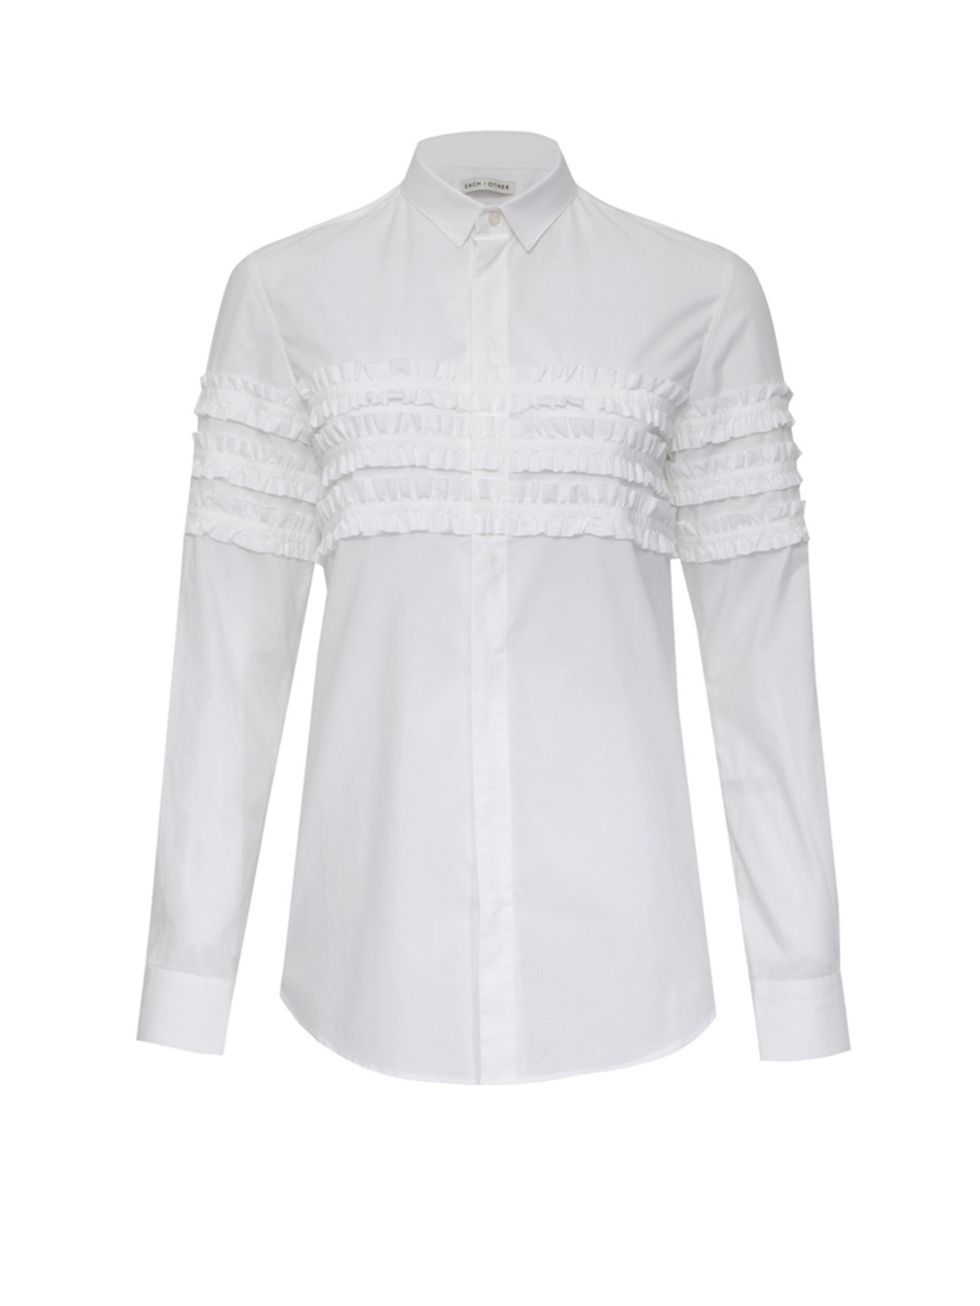 <p>Each x Other shirt, £215 at <a href="http://www.liberty.co.uk/fcp/product/Liberty//White-Ruffle-Poplin-Shirt/132229" target="_blank">liberty.co.uk</a></p>